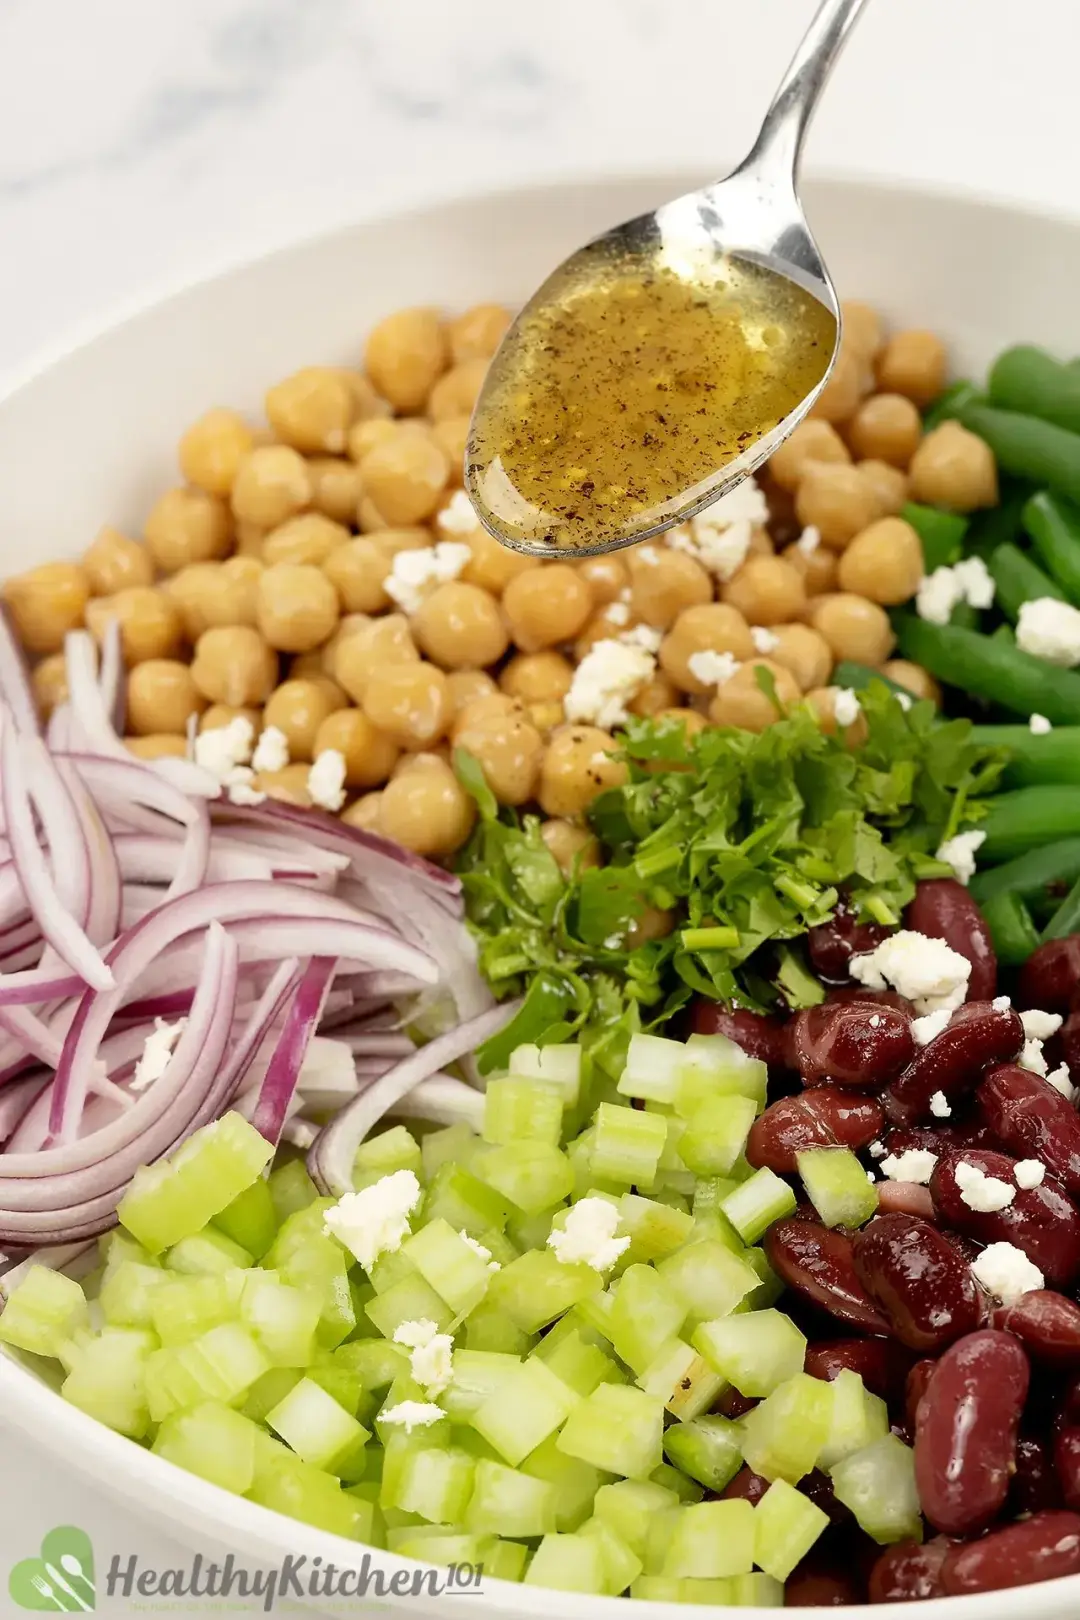 A bowl of three-bean salad with dressing, garnished with fresh herbs.